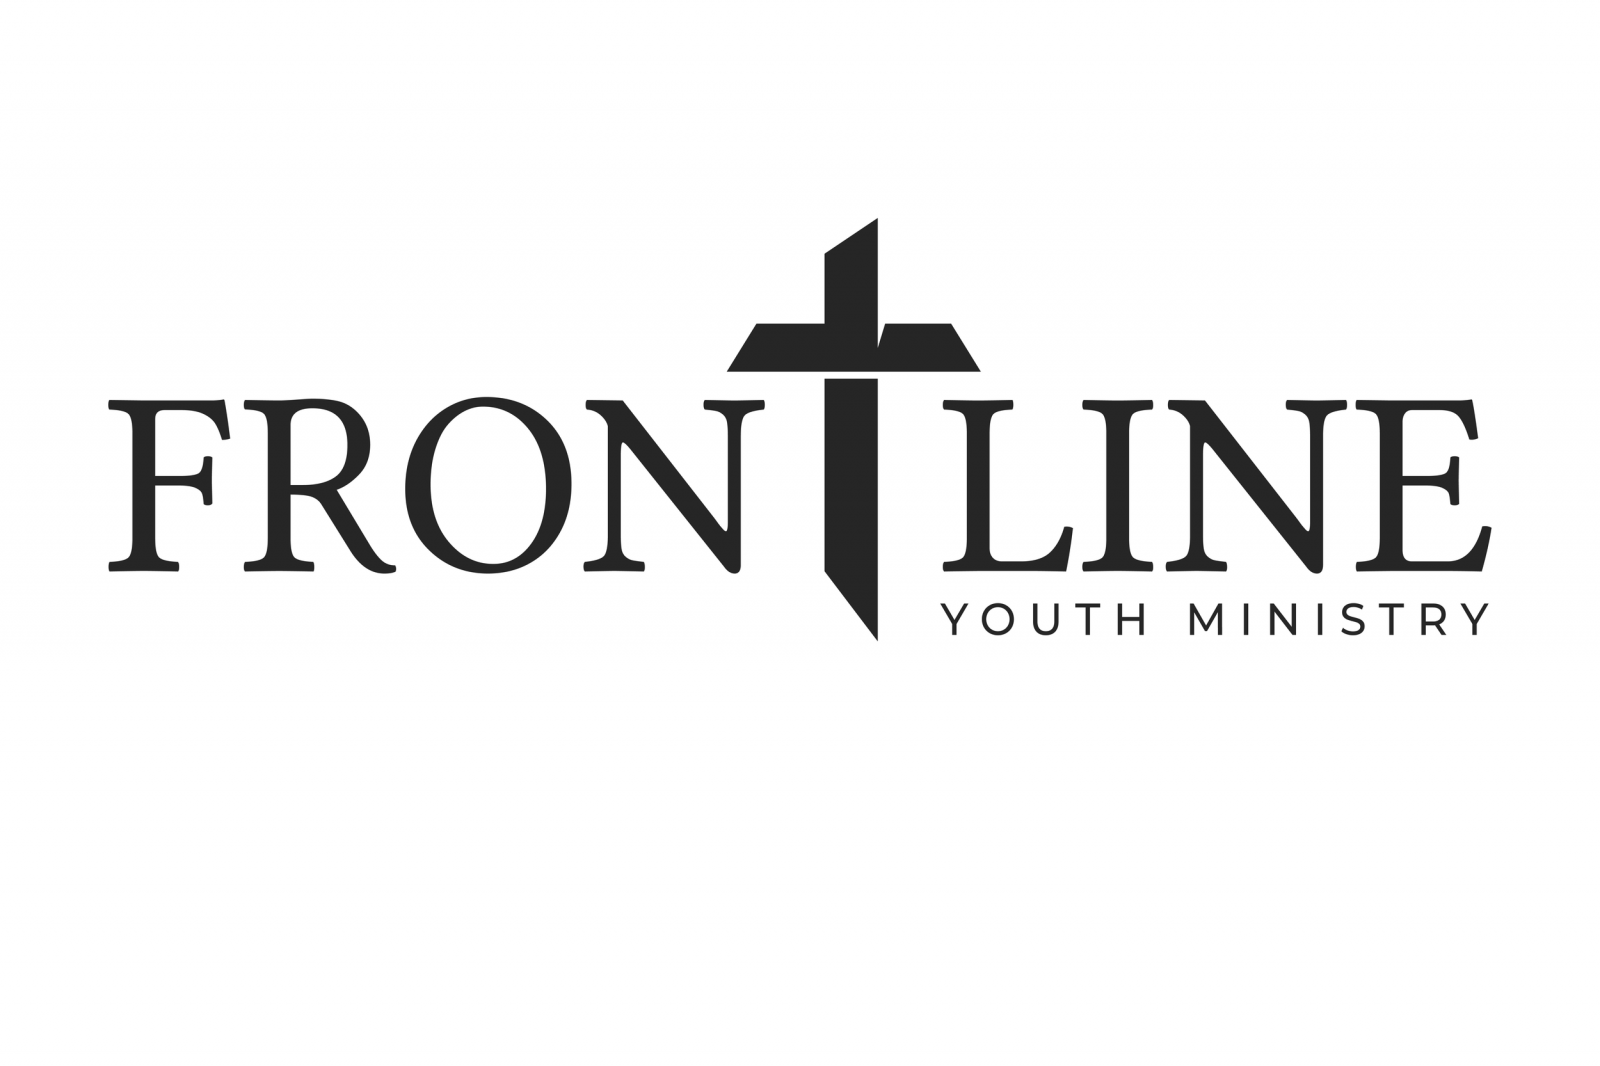 FRONTLINE YOUTH